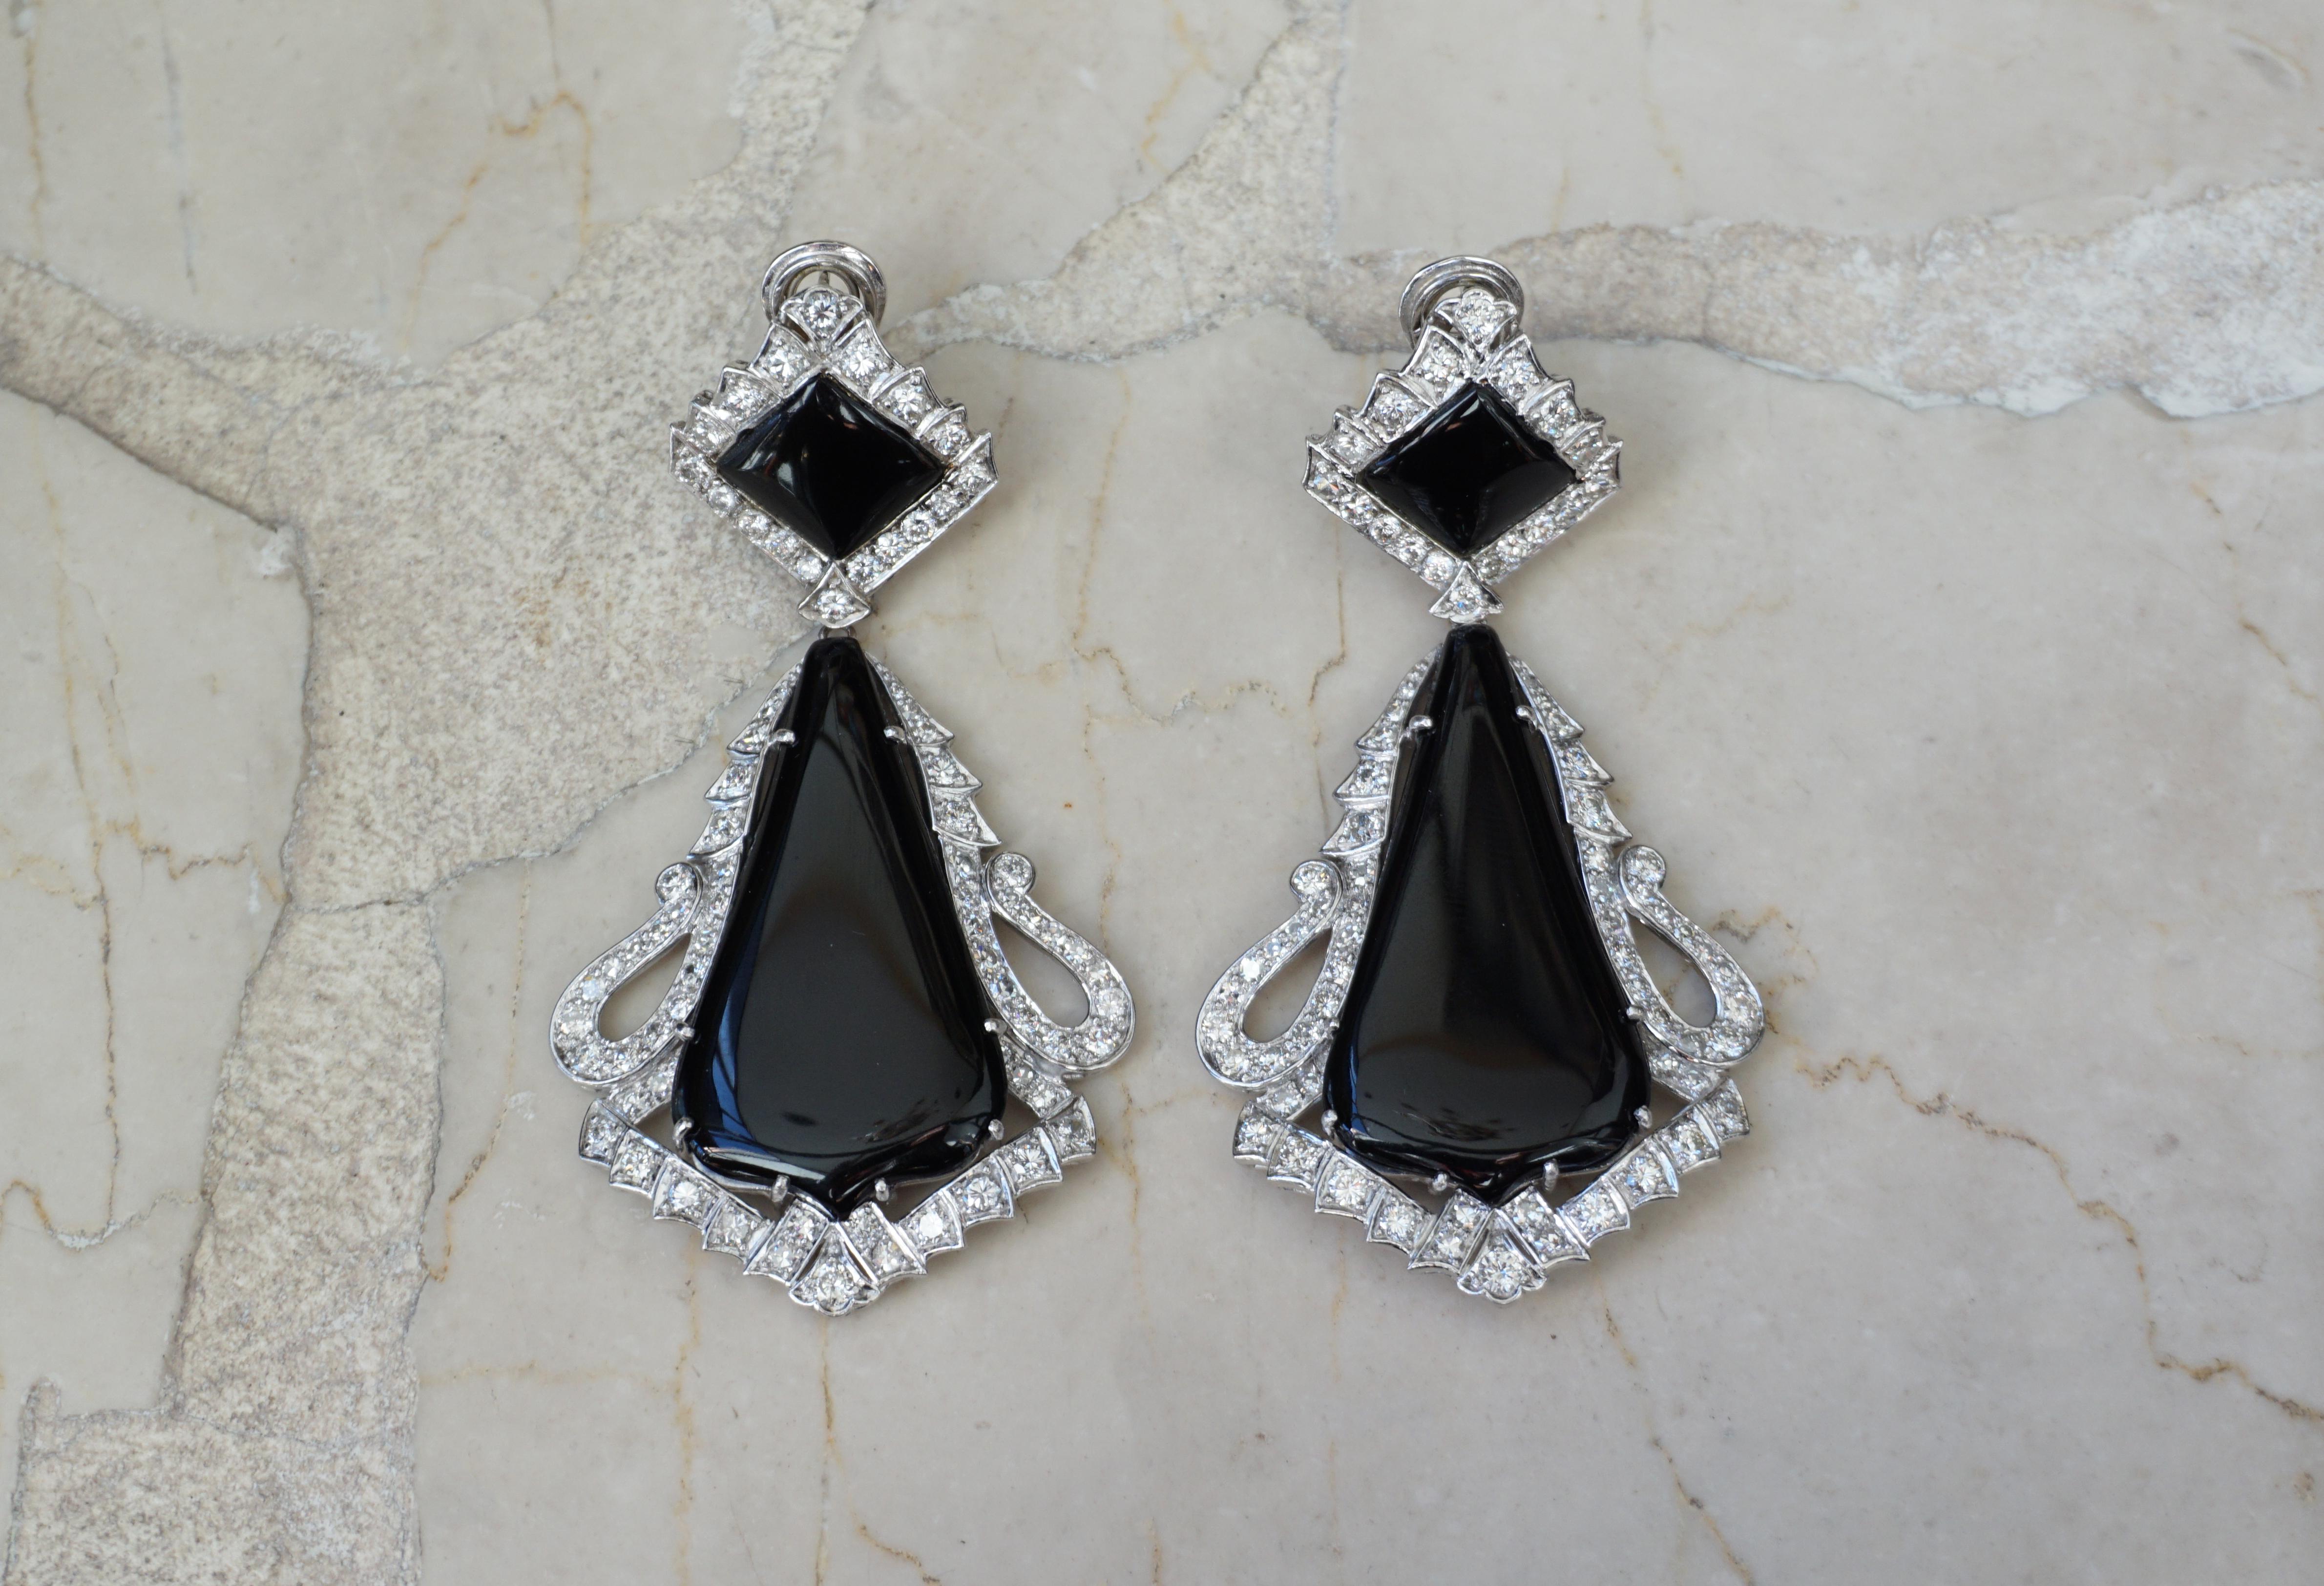 Vintage European Circa 1970

Constructed completely of 18 Karat White Gold
with detachable bottom Pendants

Containing 4 Custom-cut Polished pieces of Genuine Earth-Mined Black Onyx

& a total of approximately 5.50 carats of Colorless Genuine